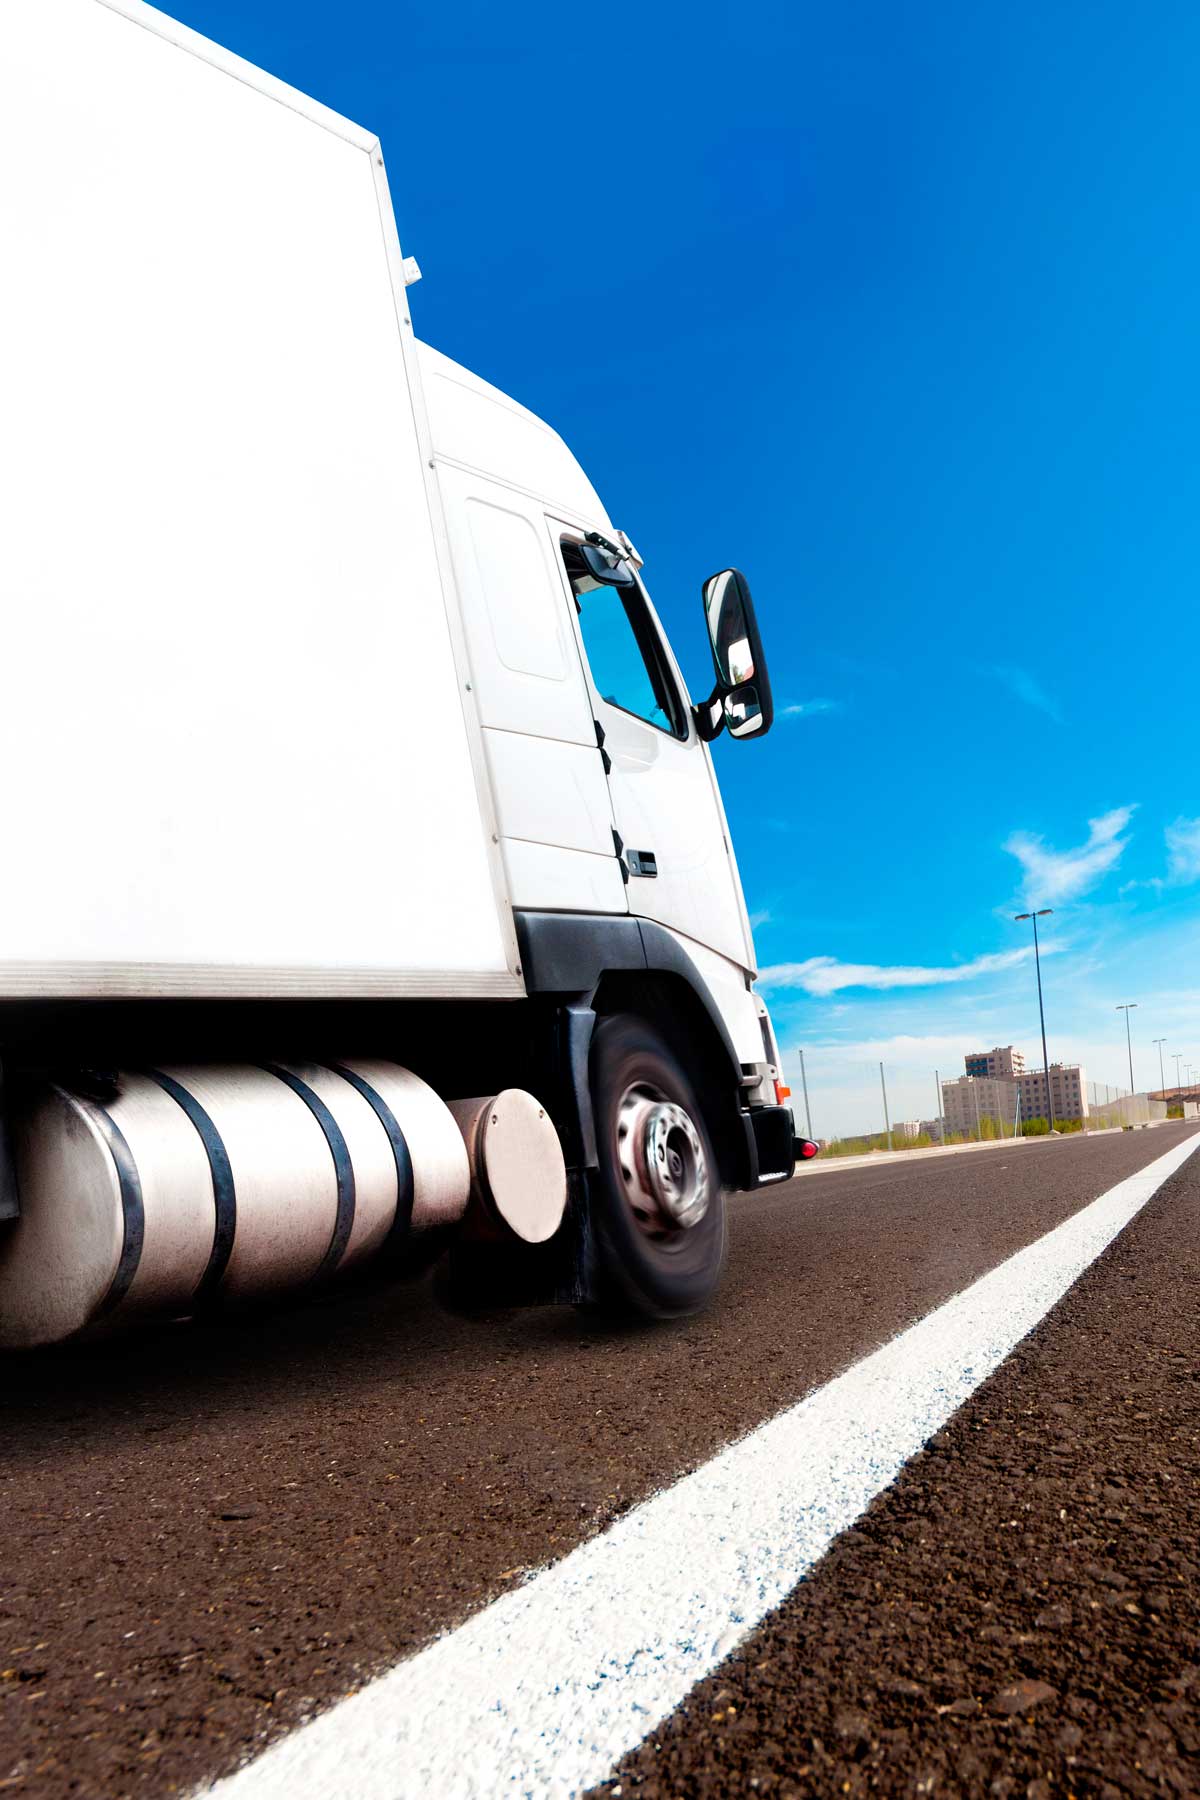 Are you Looking for a Professional HGV Test in Dublin?